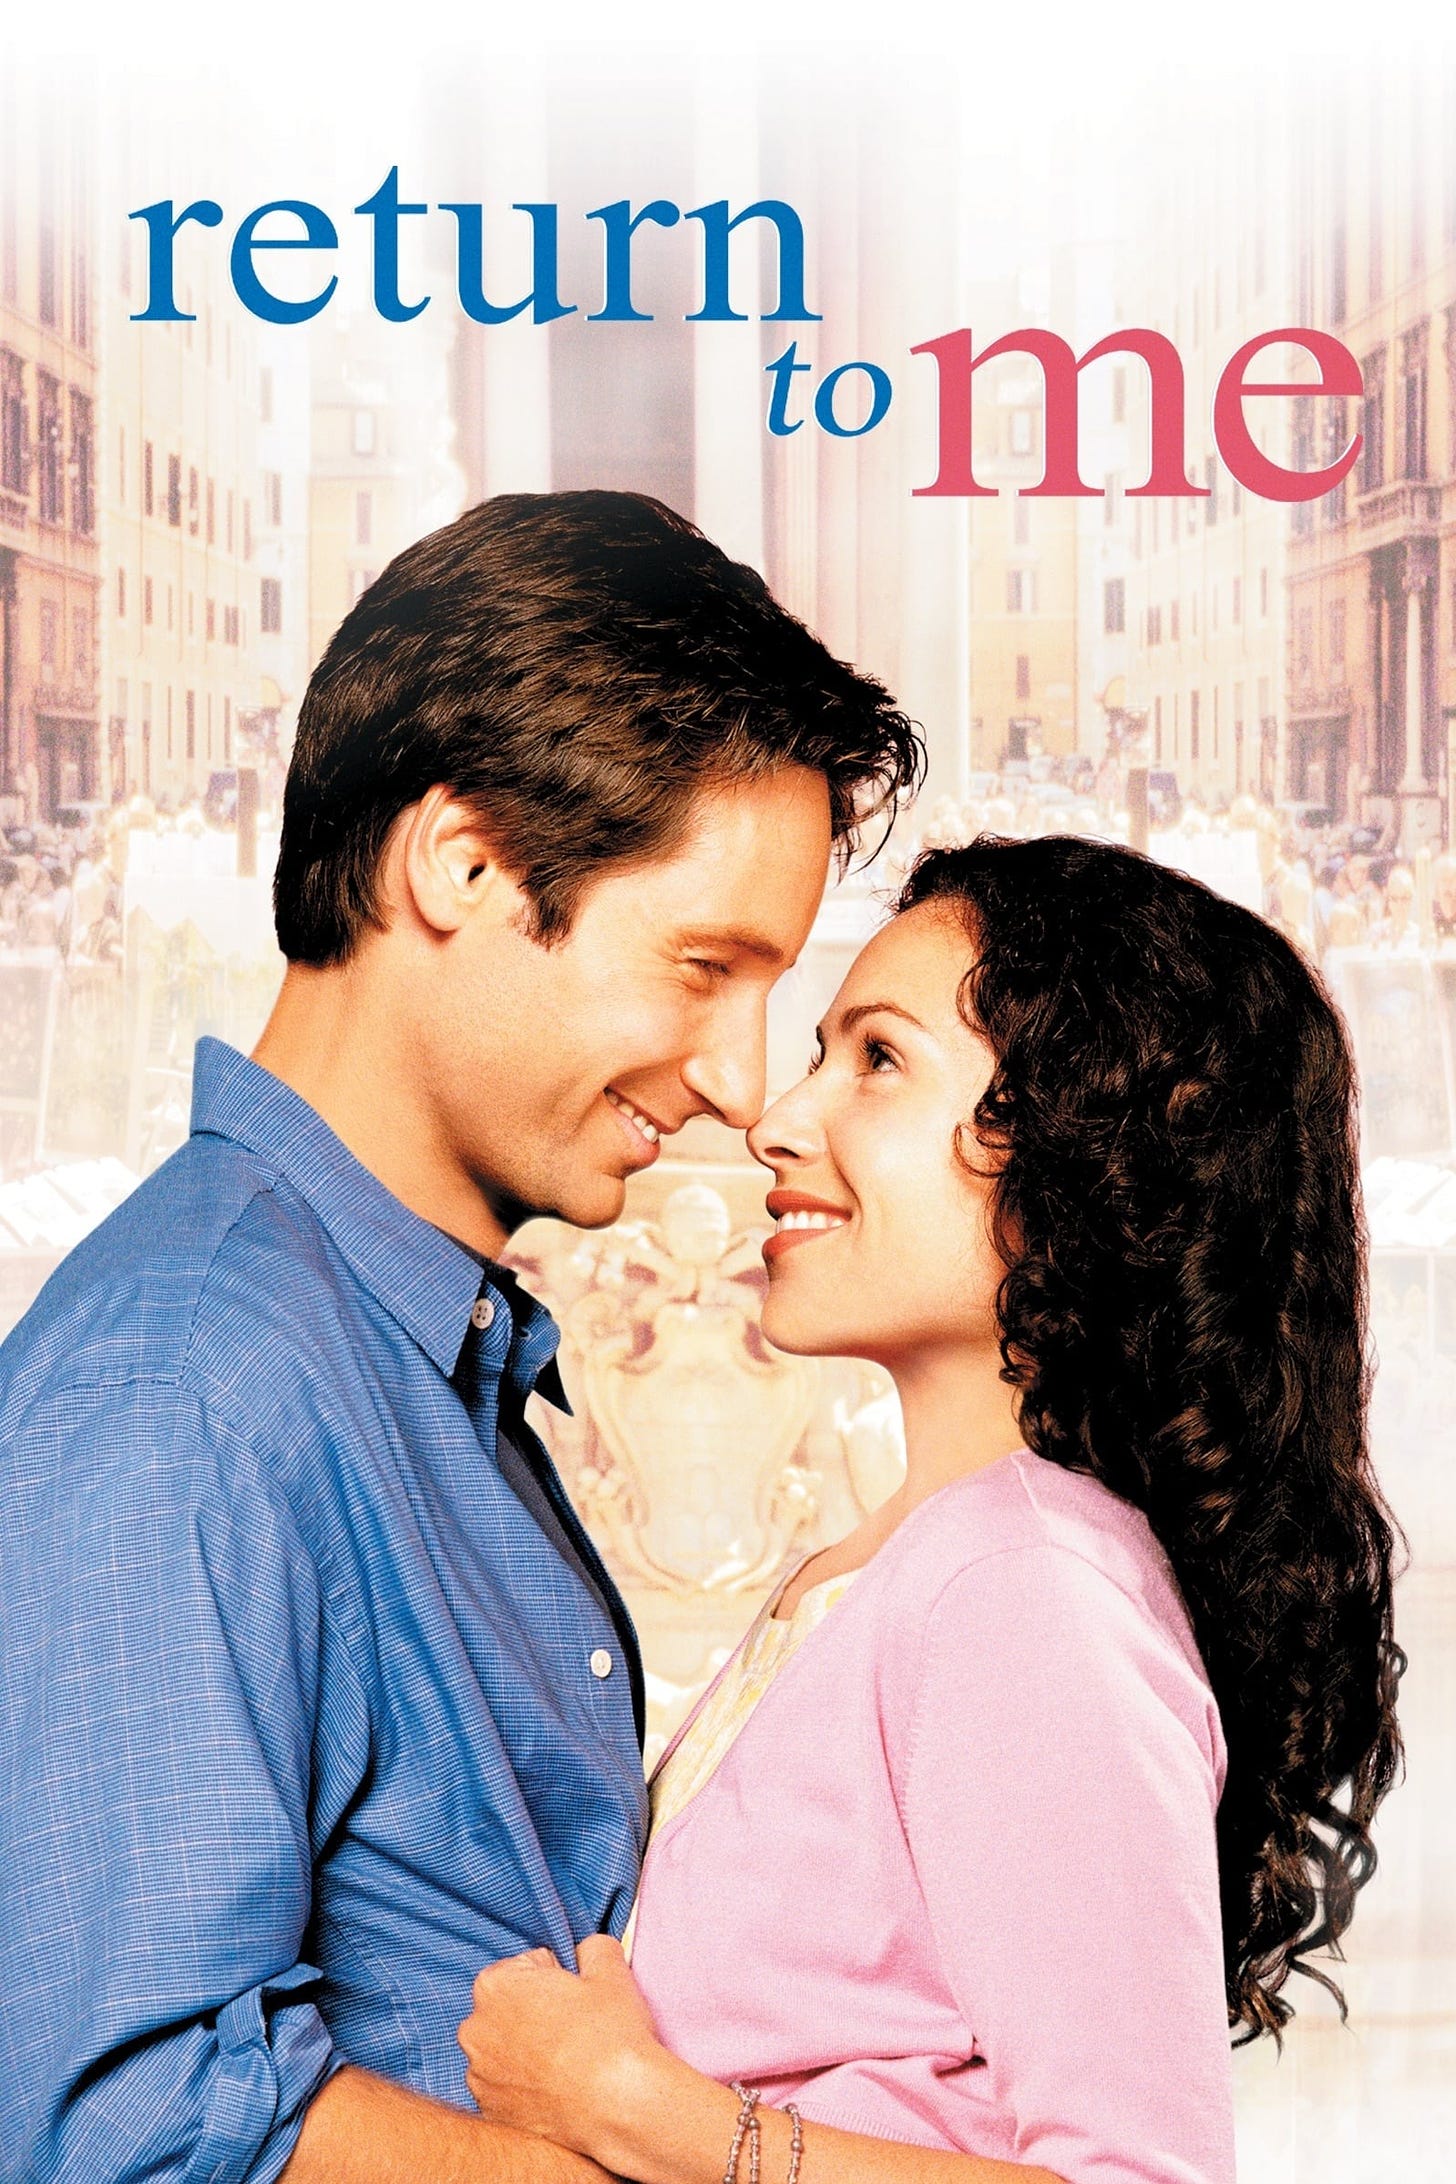 The cover of Return to Me, with David Duchovny and Minnie Driver gazing lovingly into each other's eyes